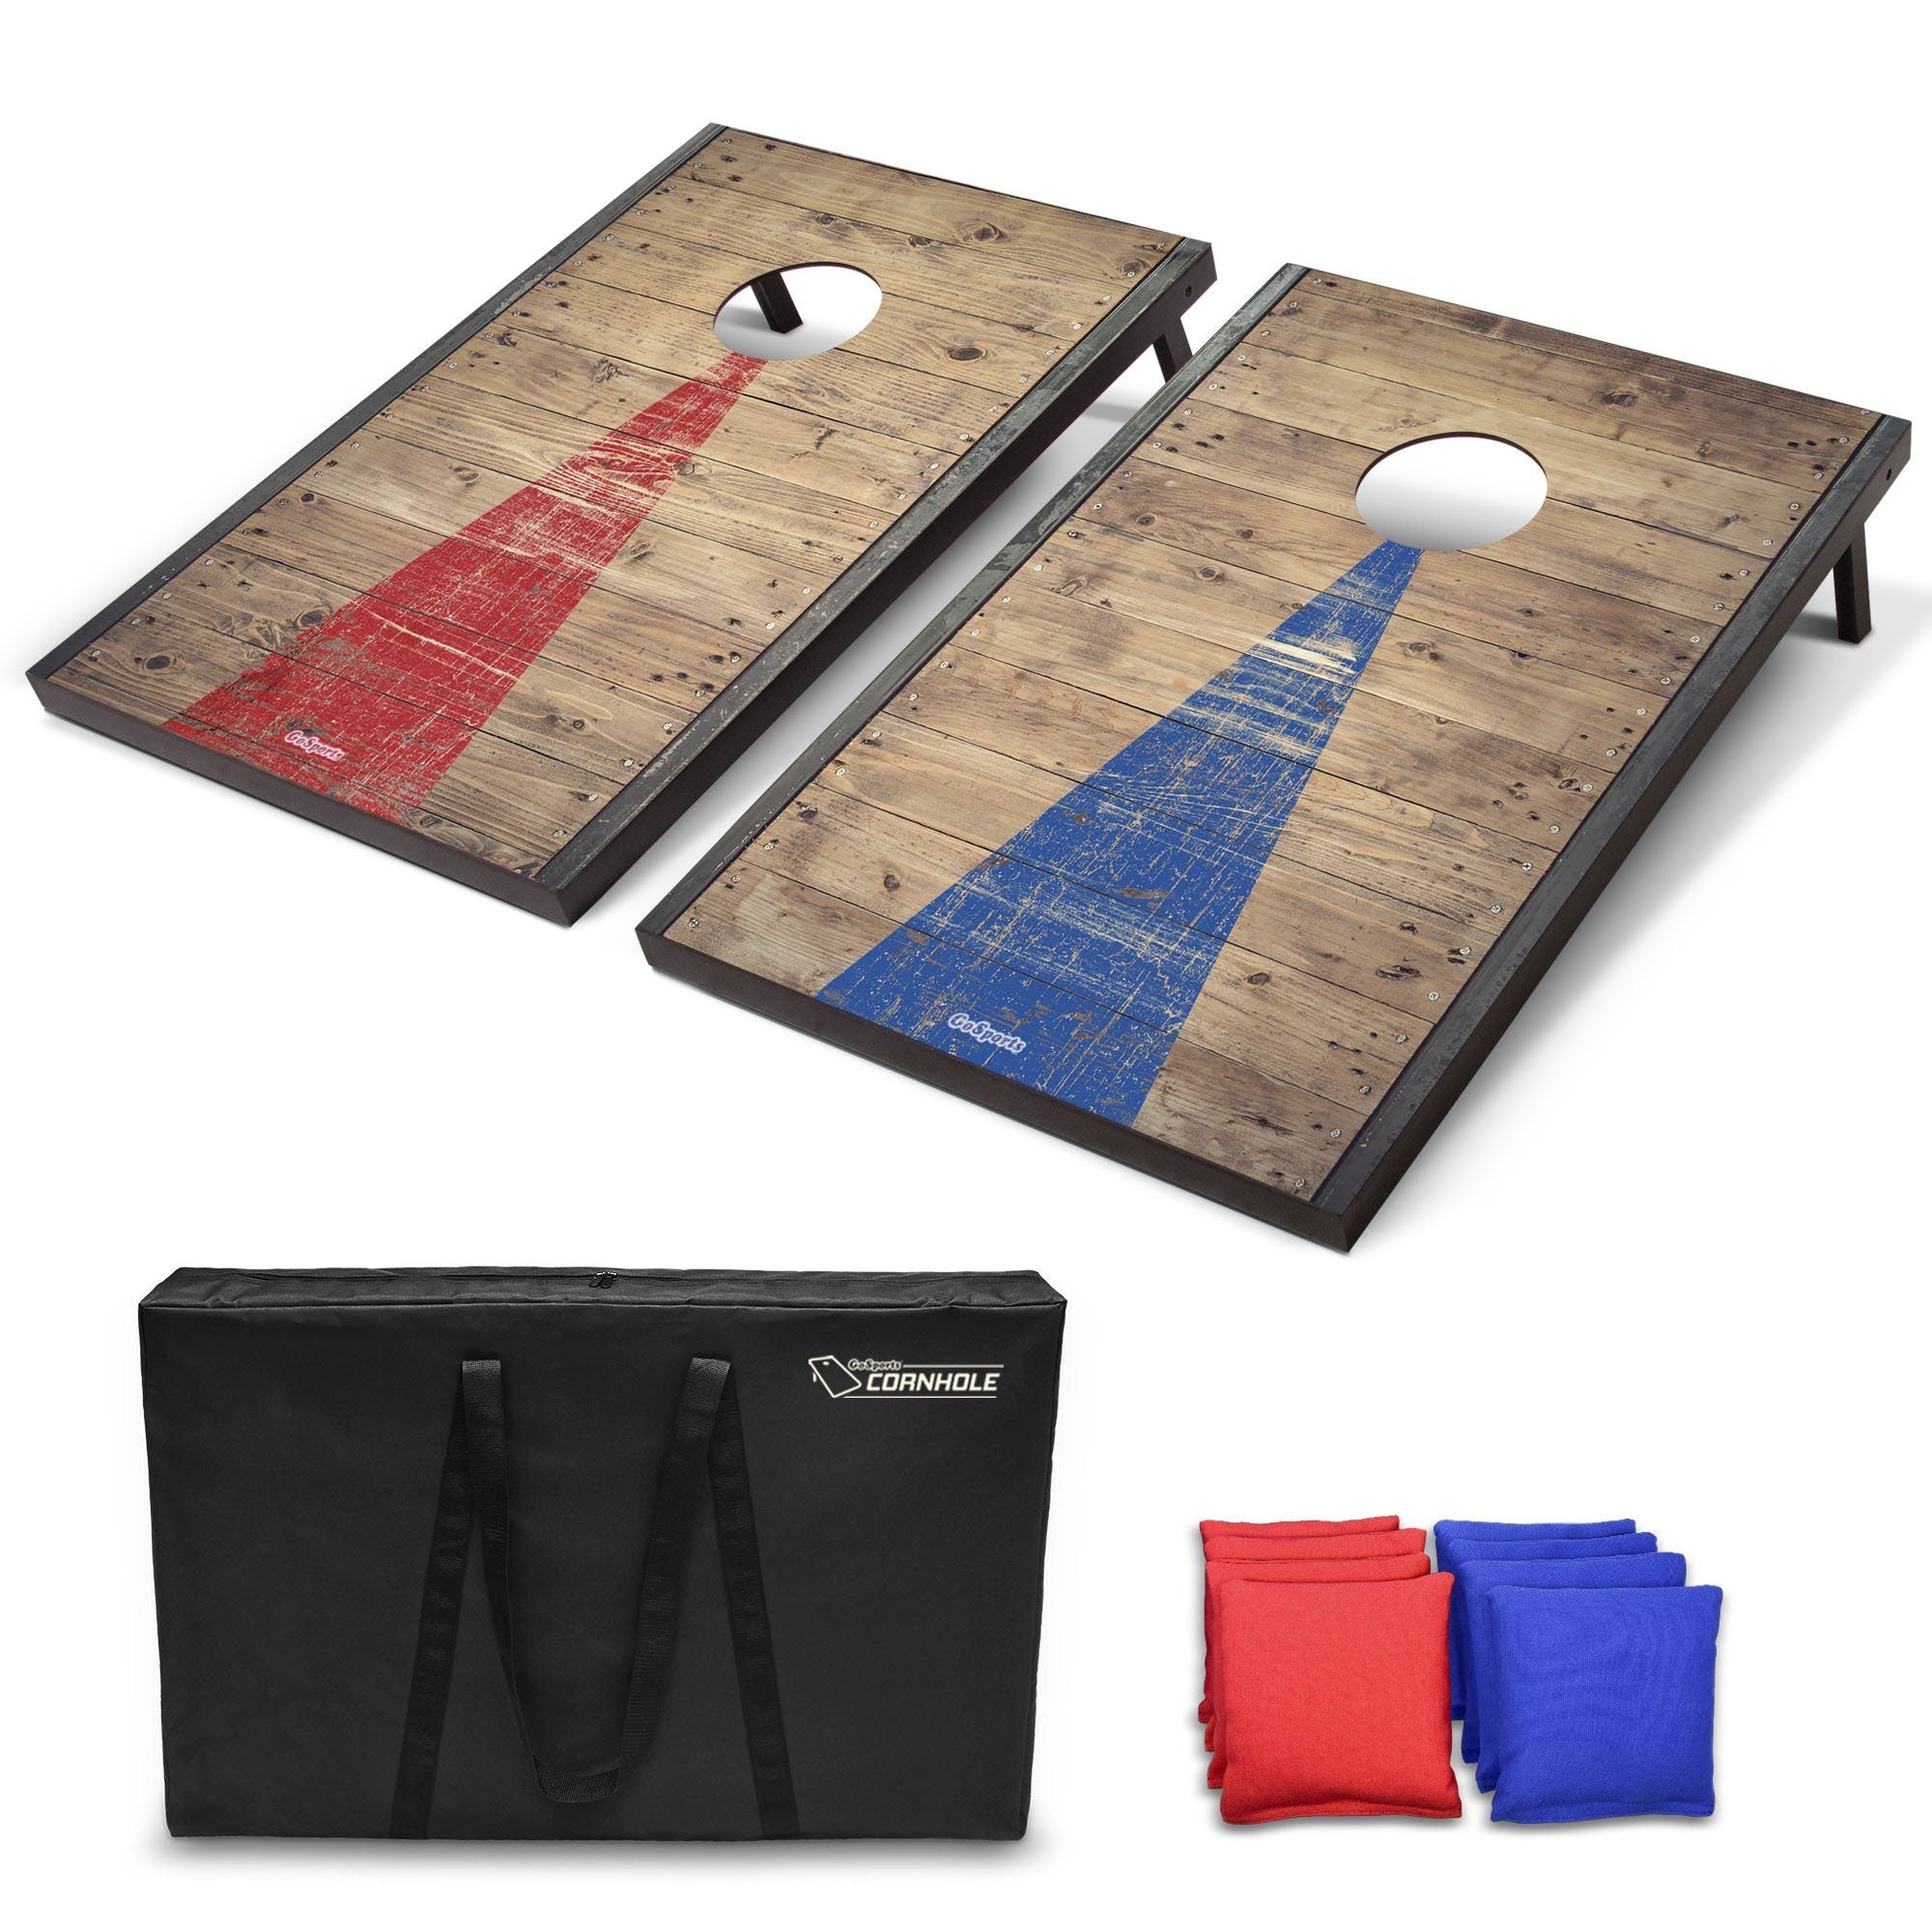 Photo 1 of **BAG IS TORN**
Gosports Classic Cornhole Set with Rustic Wood Finish | Includes 8 Bags, Carry Case and Rules